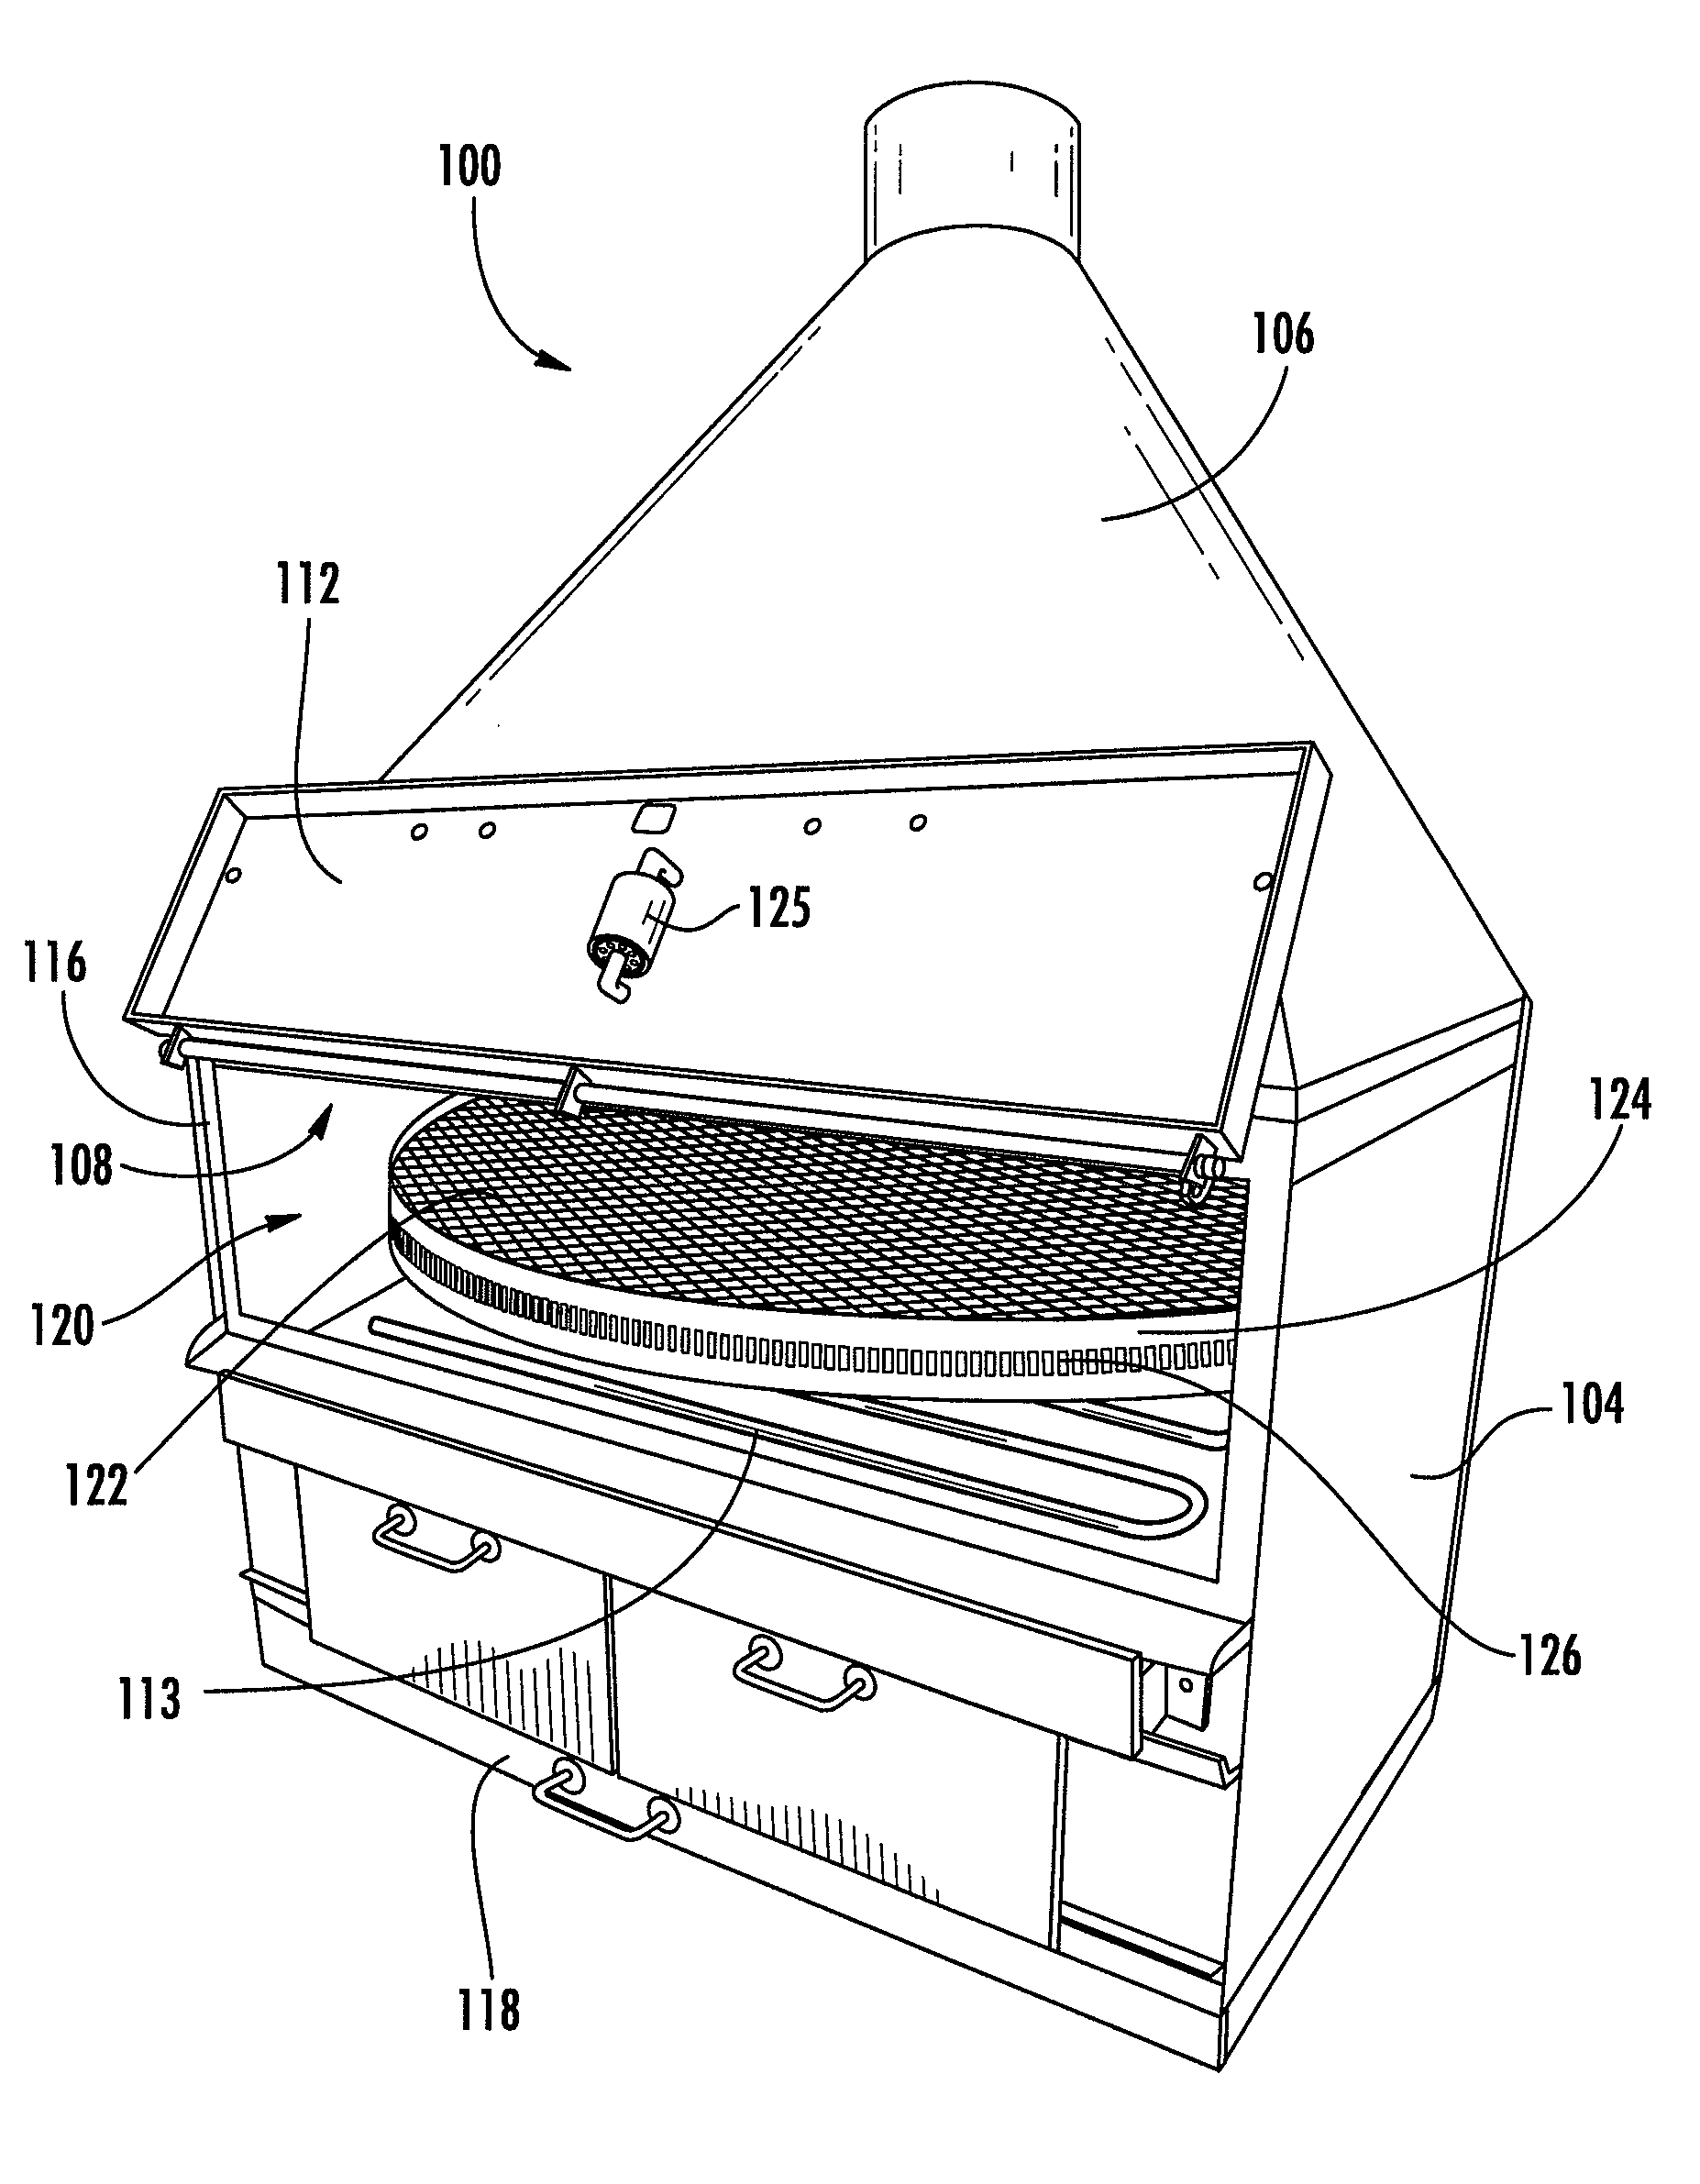 Barbeque oven with rotating cooking tray